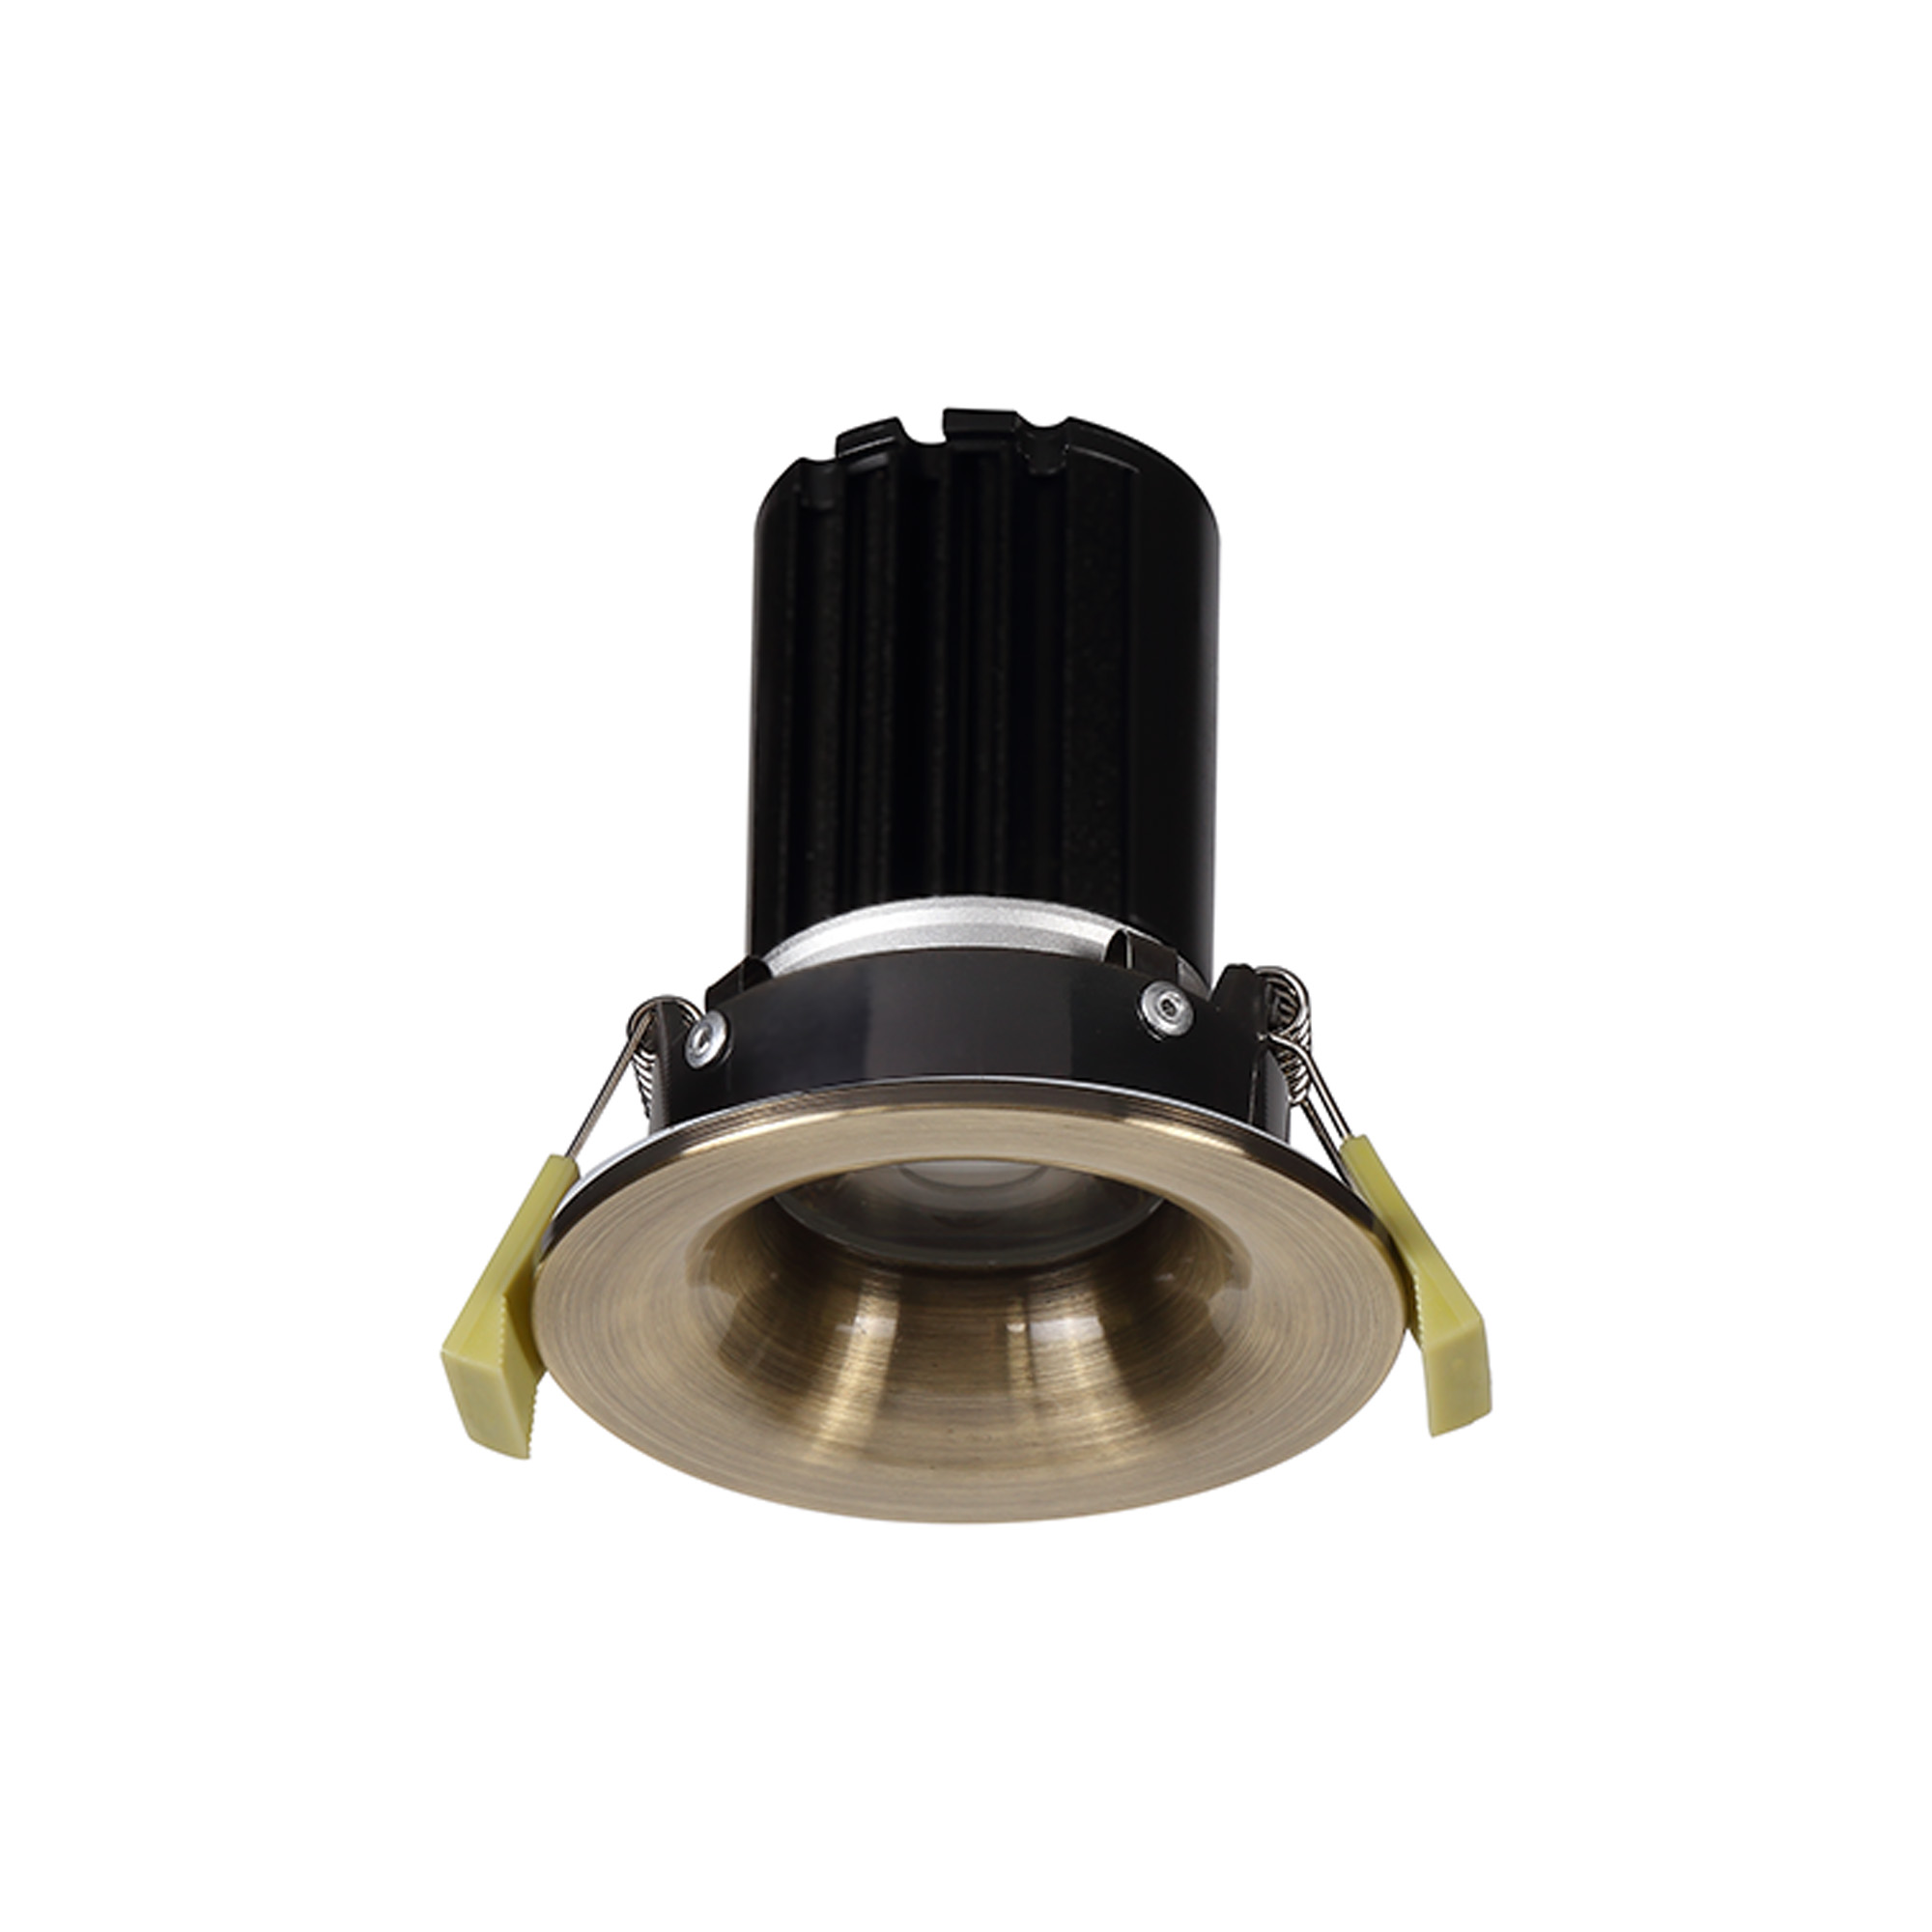 DM202496  Bruve 12 Tridonic powered 12W 3000K 1200lm 36° LED Engine;300mA ; CRI>90 LED Engine Antique Brass Fixed Round Recessed Downlight; Inner Glass cover; IP65